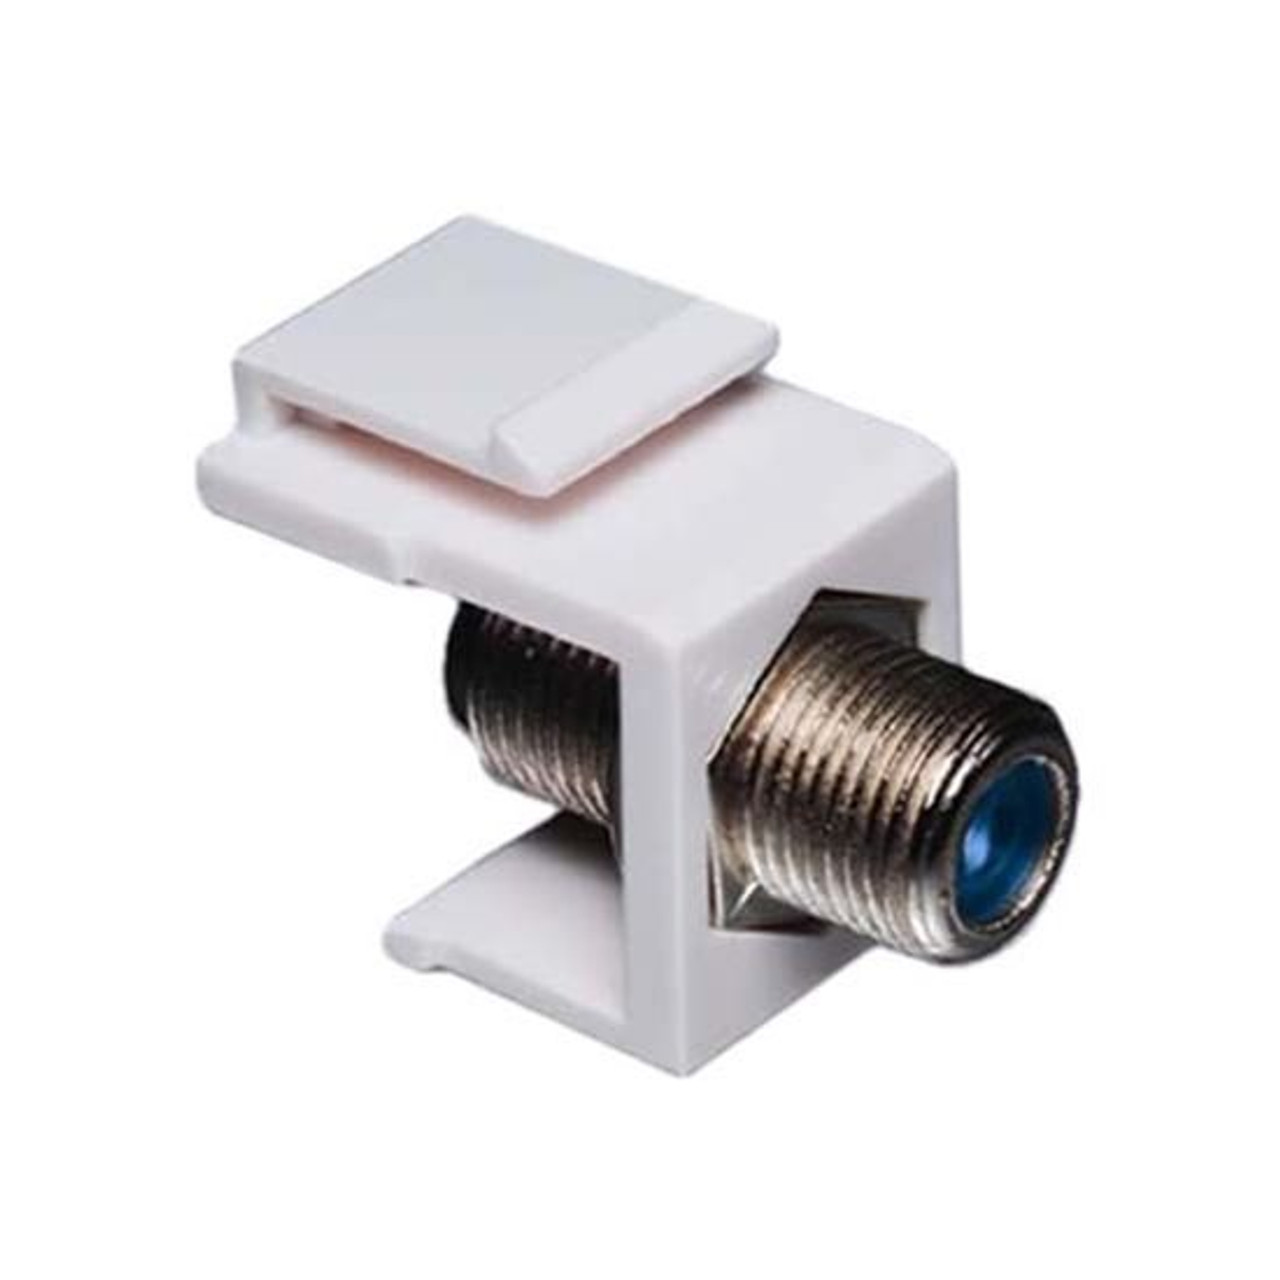 Eagle F Type Keystone Jack White Insert 3 GHz Coaxial Modular Connector Female to Female RG59 RG6 Channel Master High Frequency F-81 Jack Snap-In